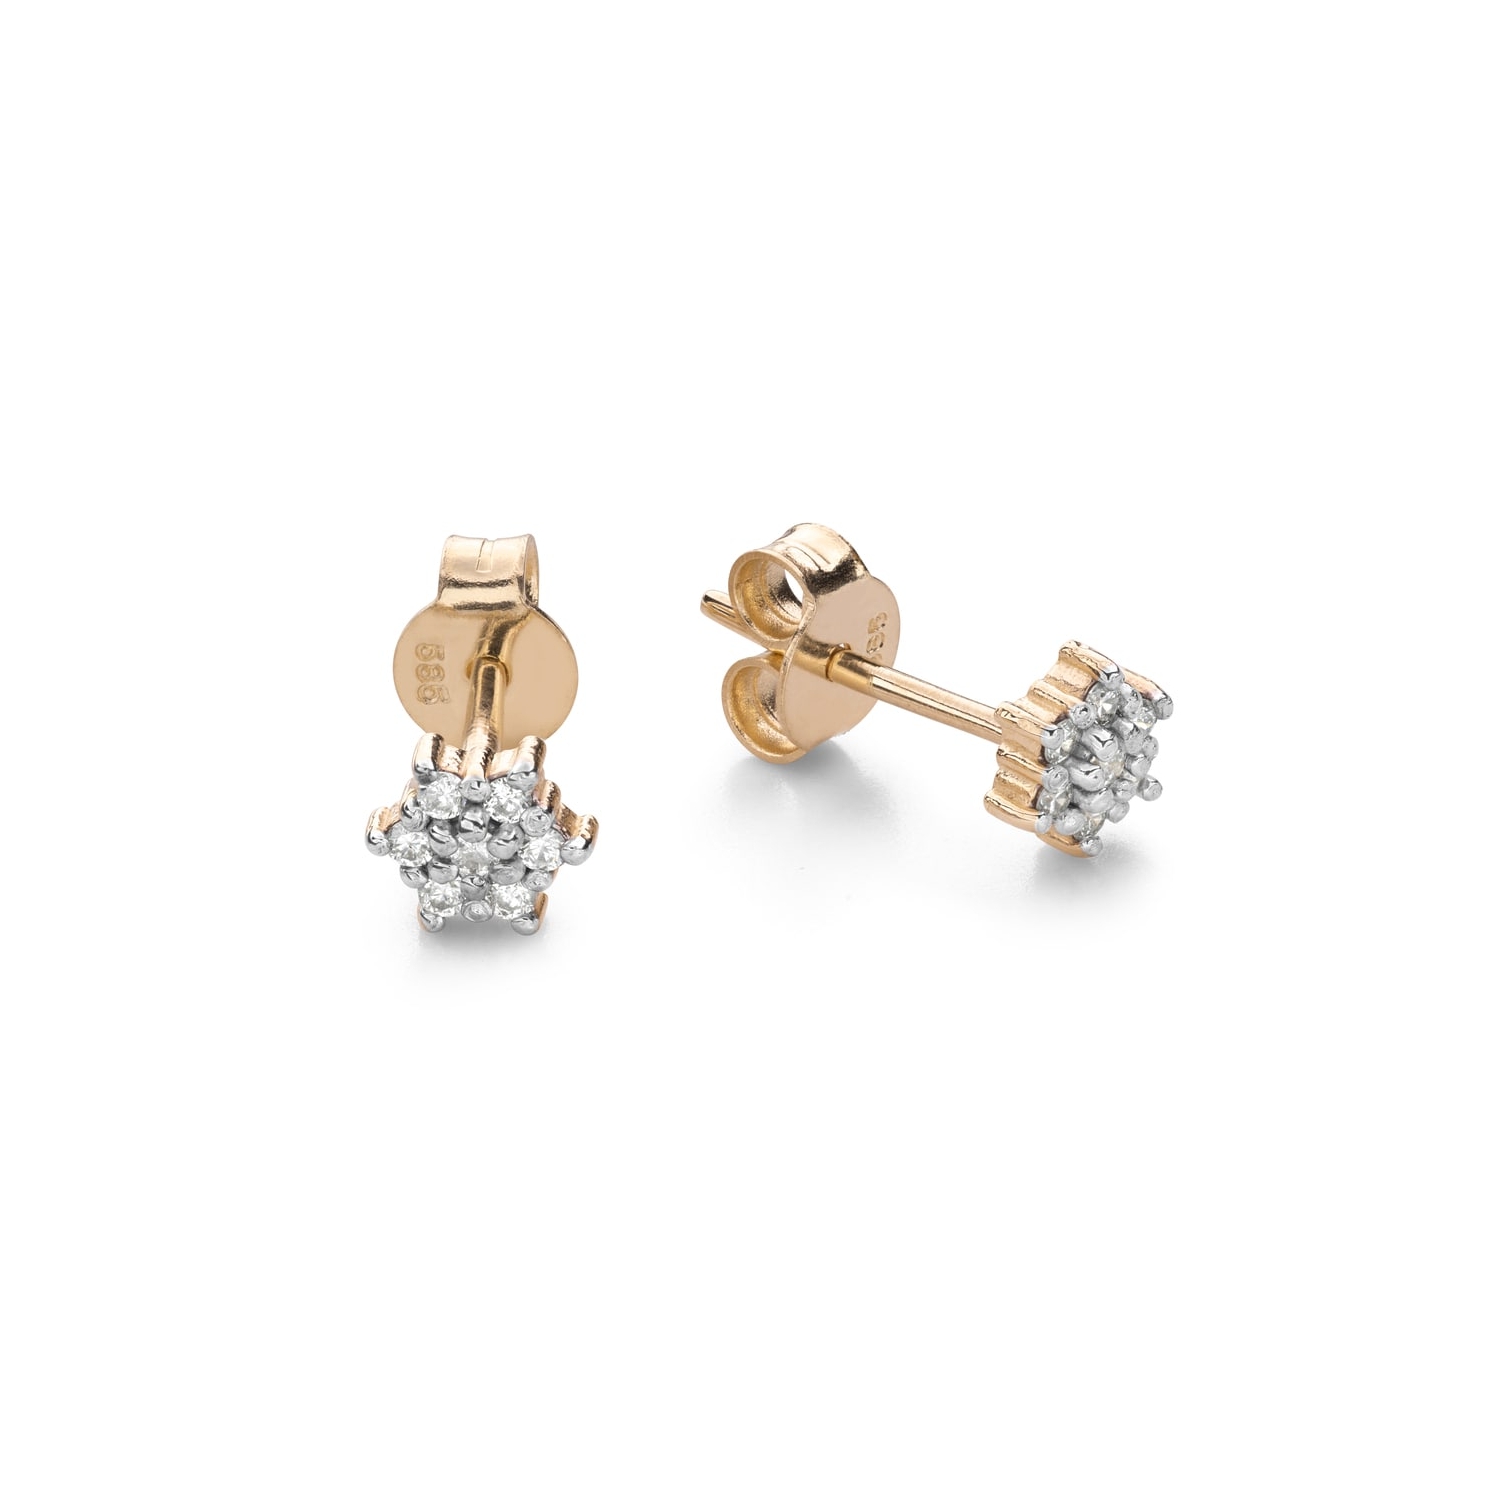 Gold earrings with brilliants "Elegance 49"